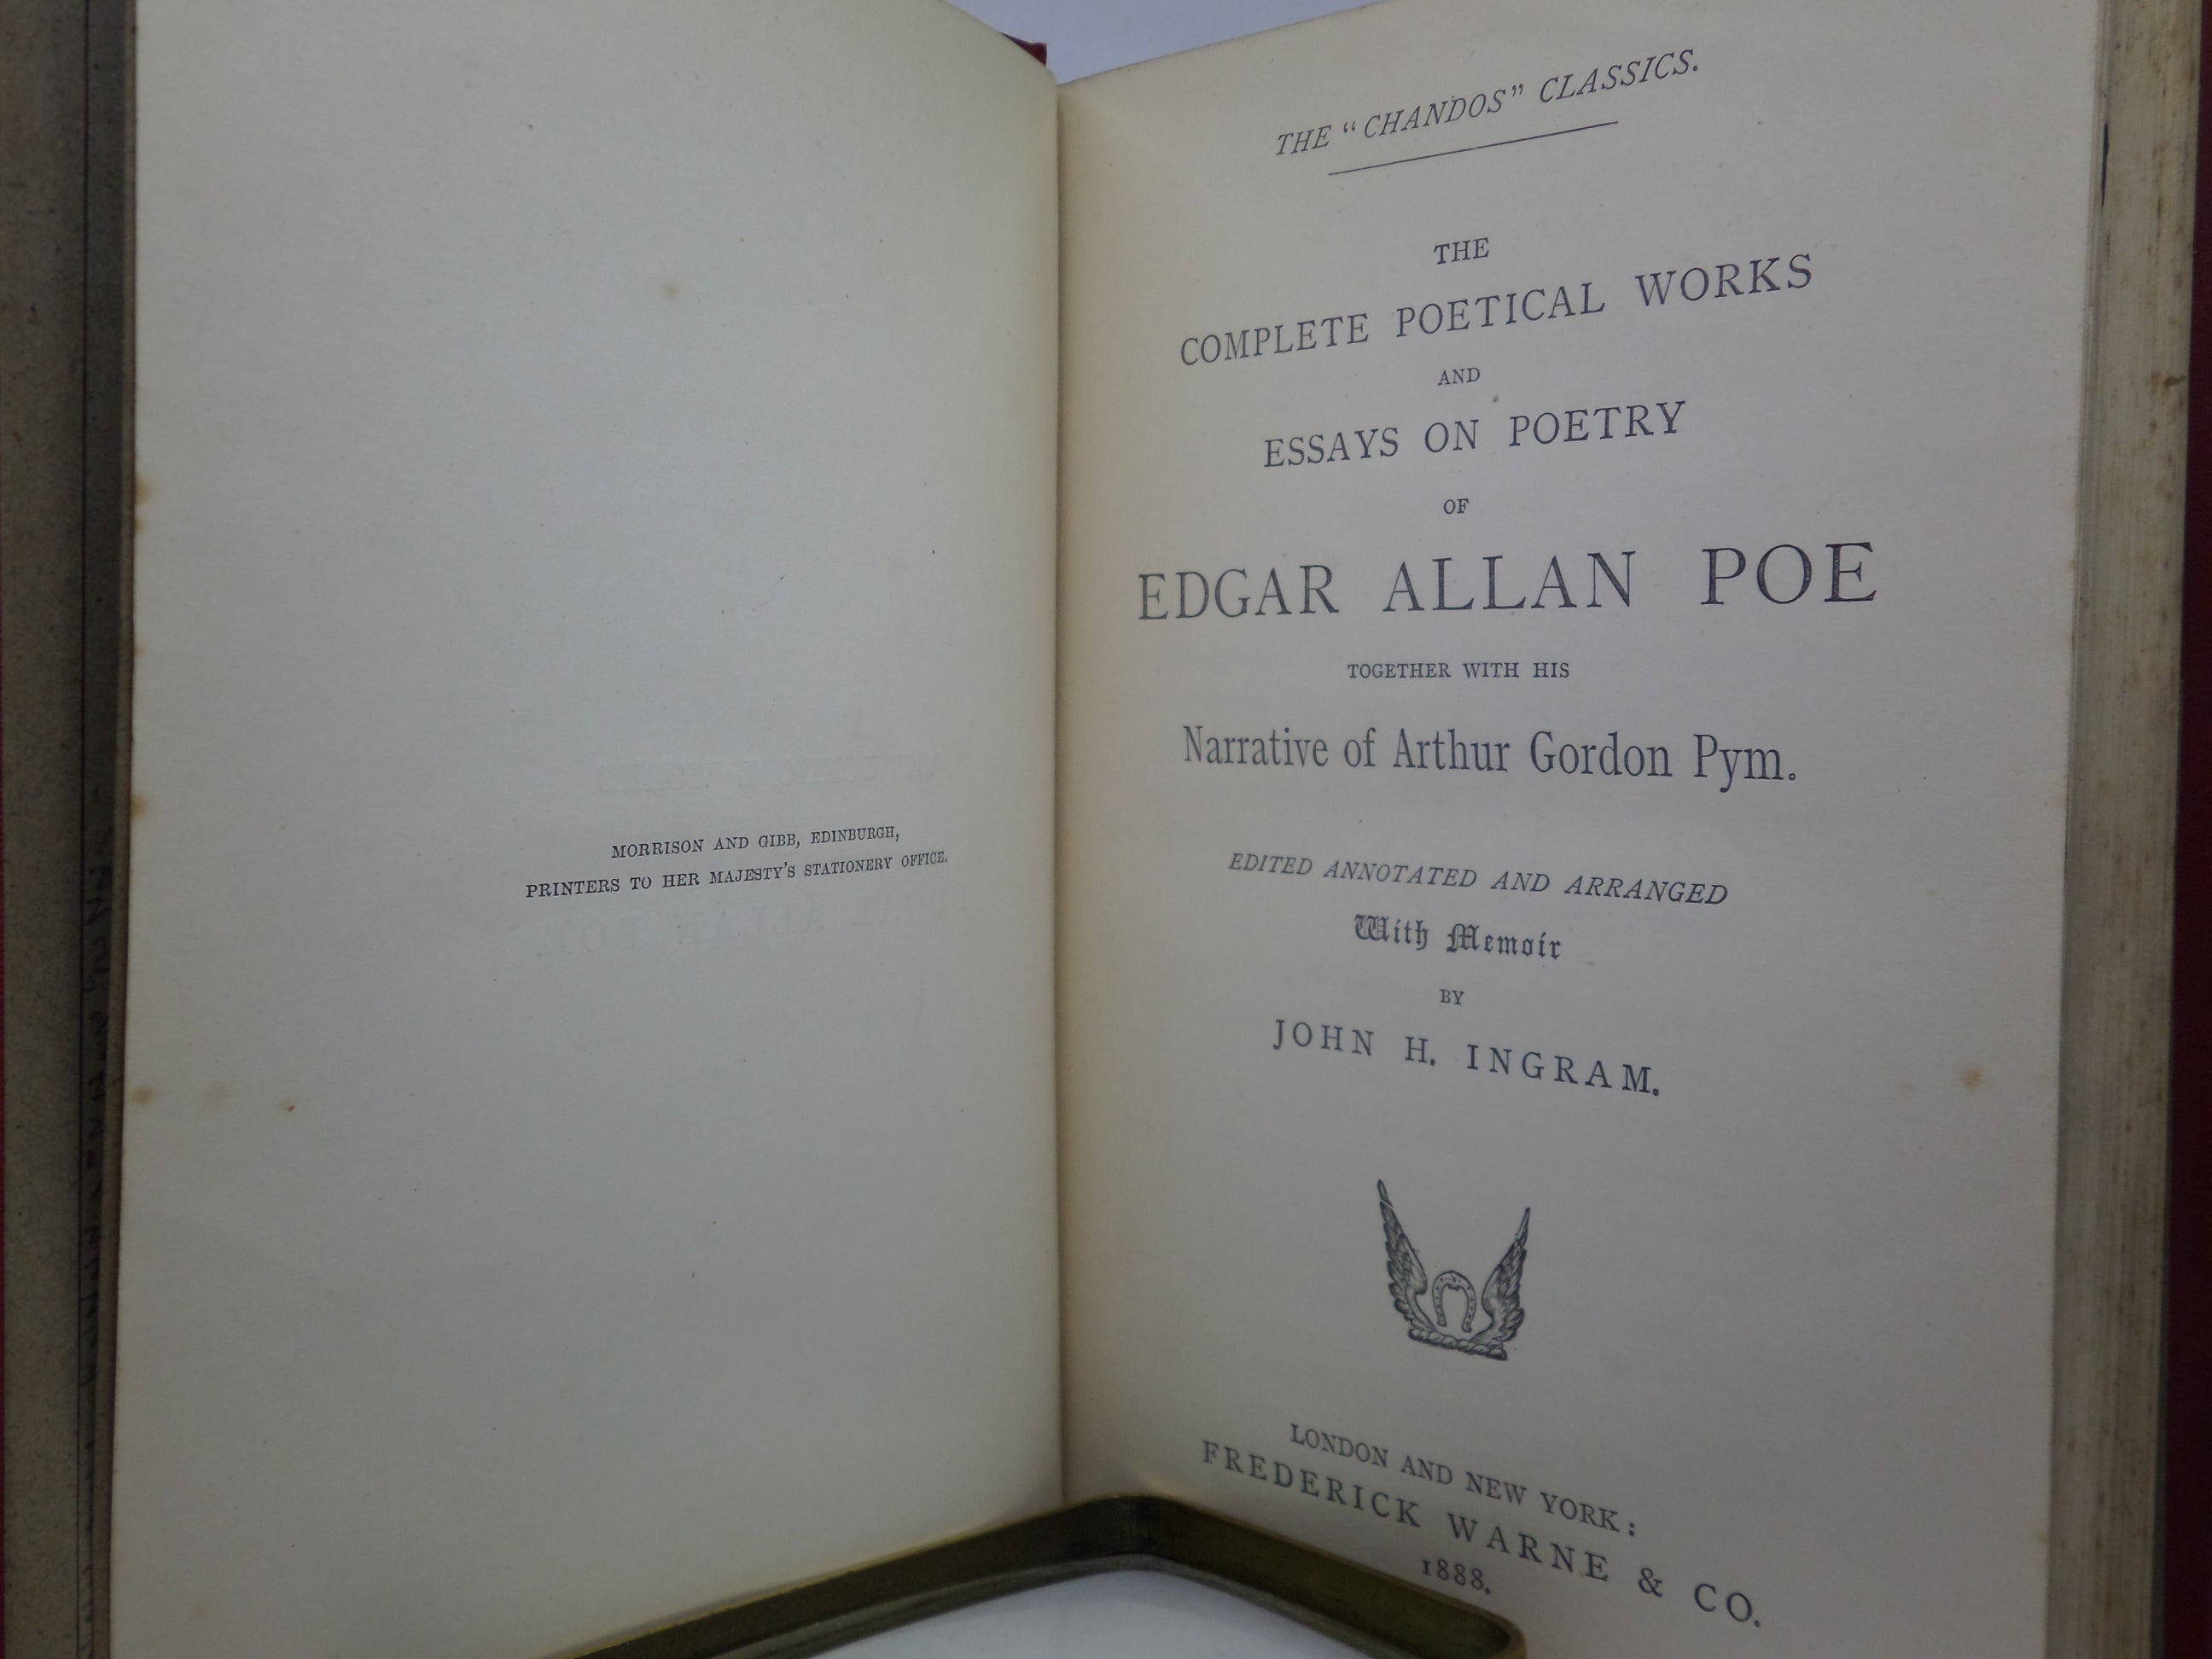 THE COMPLETE POETICAL WORKS OF EDGAR ALLAN POE 1888 THE CHANDOS CLASSICS EDITION